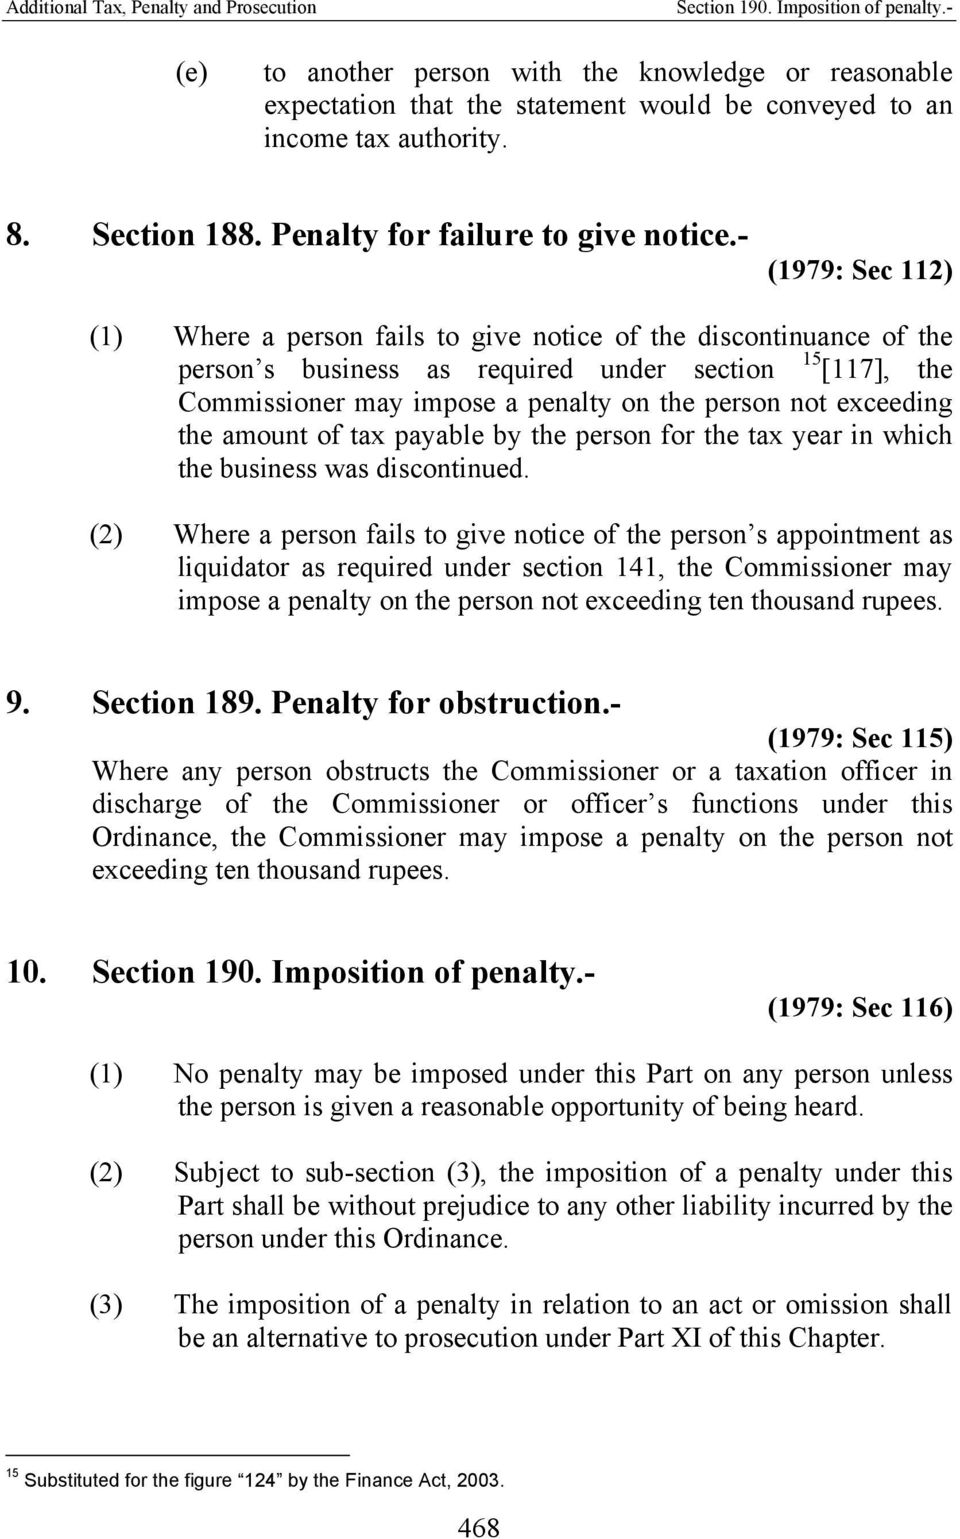 - (1979: Sec 112) (1) Where a person fails to give notice of the discontinuance of the person s business as required under section 15 [117], the Commissioner may impose a penalty on the person not